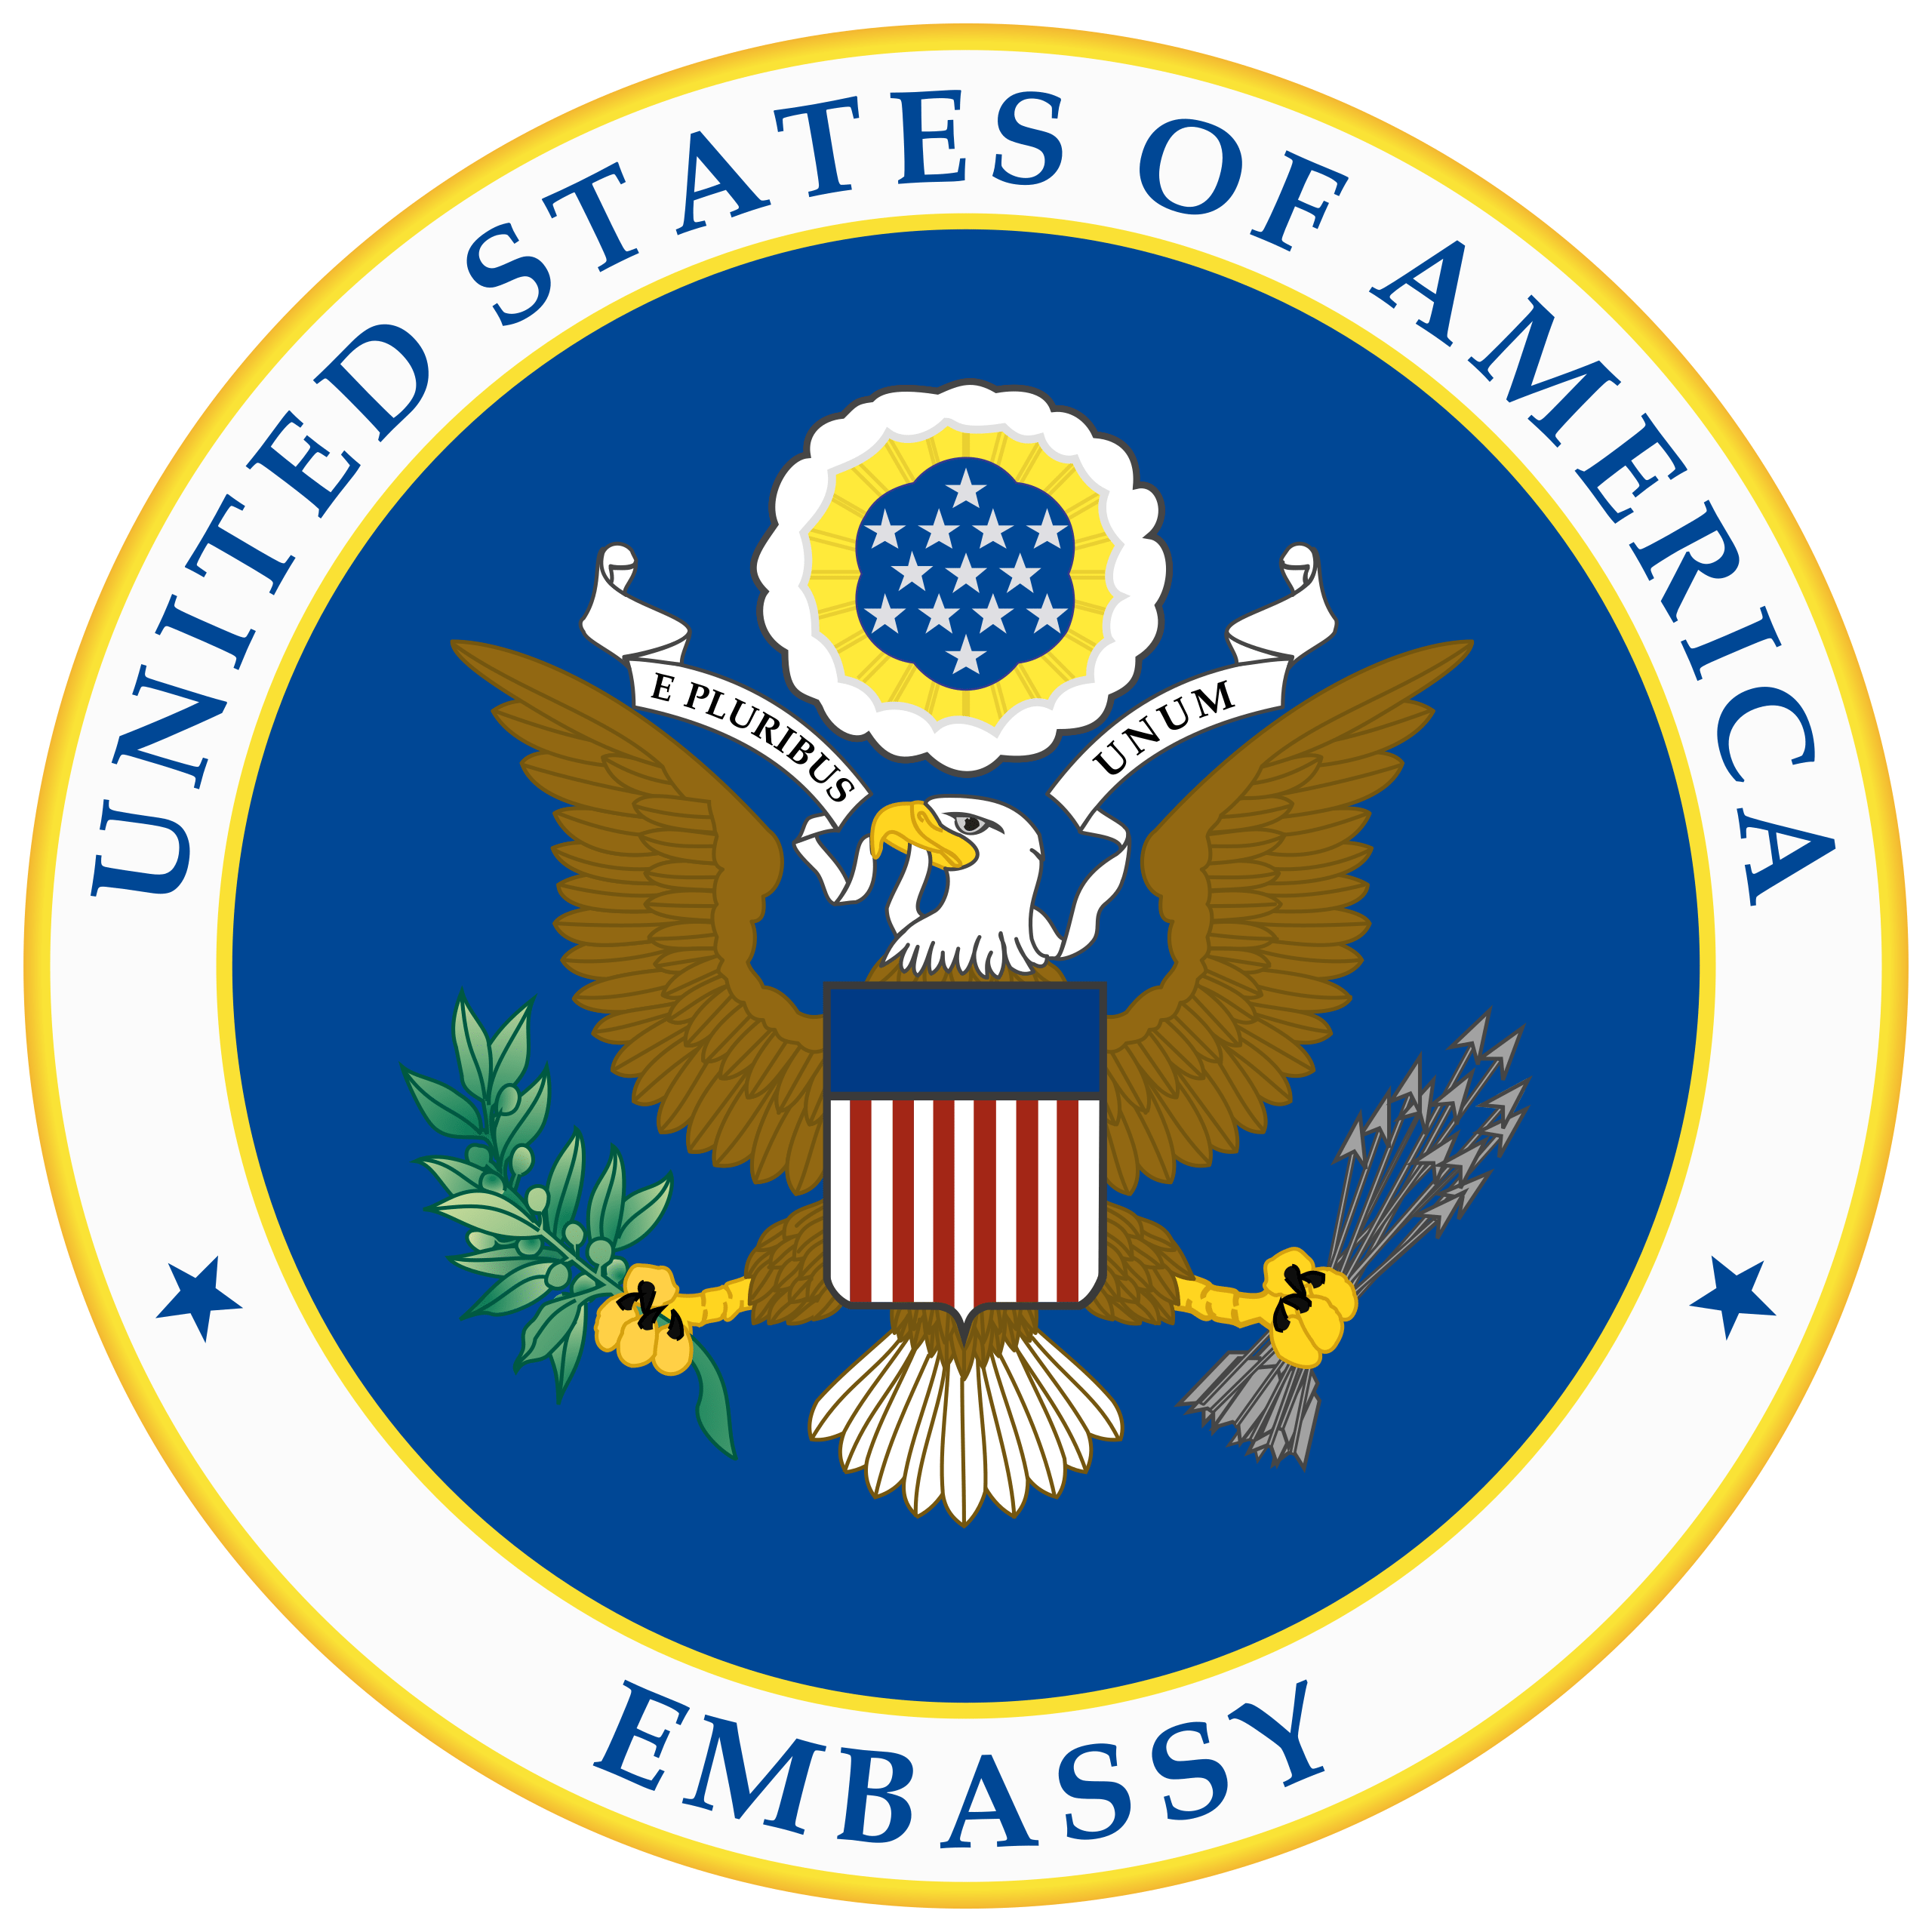 Embassy of The United States of America Seal